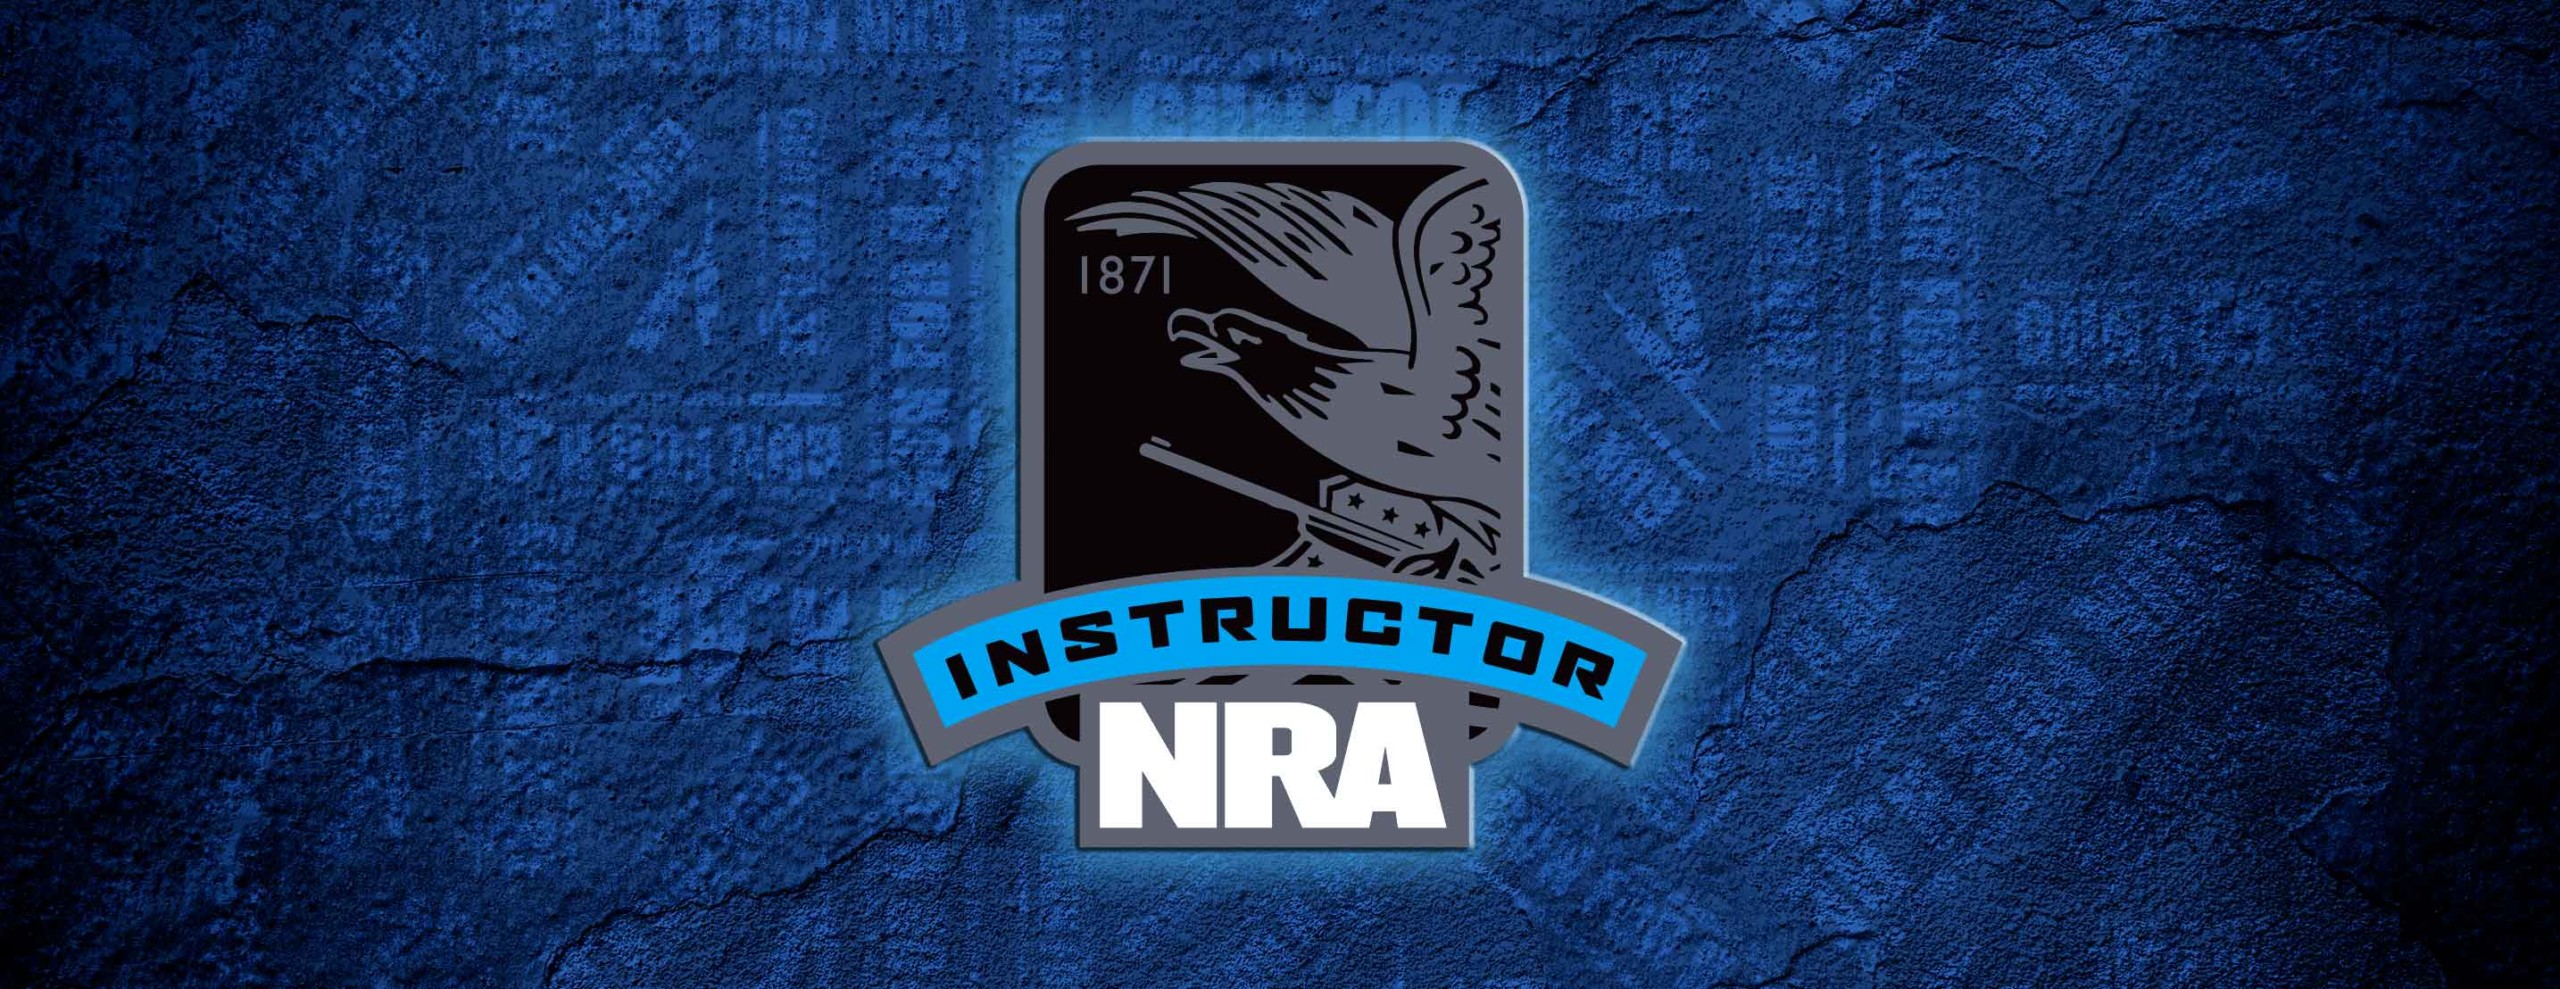 NRAinstructor scaled - NRA Certified Rifle Instructor